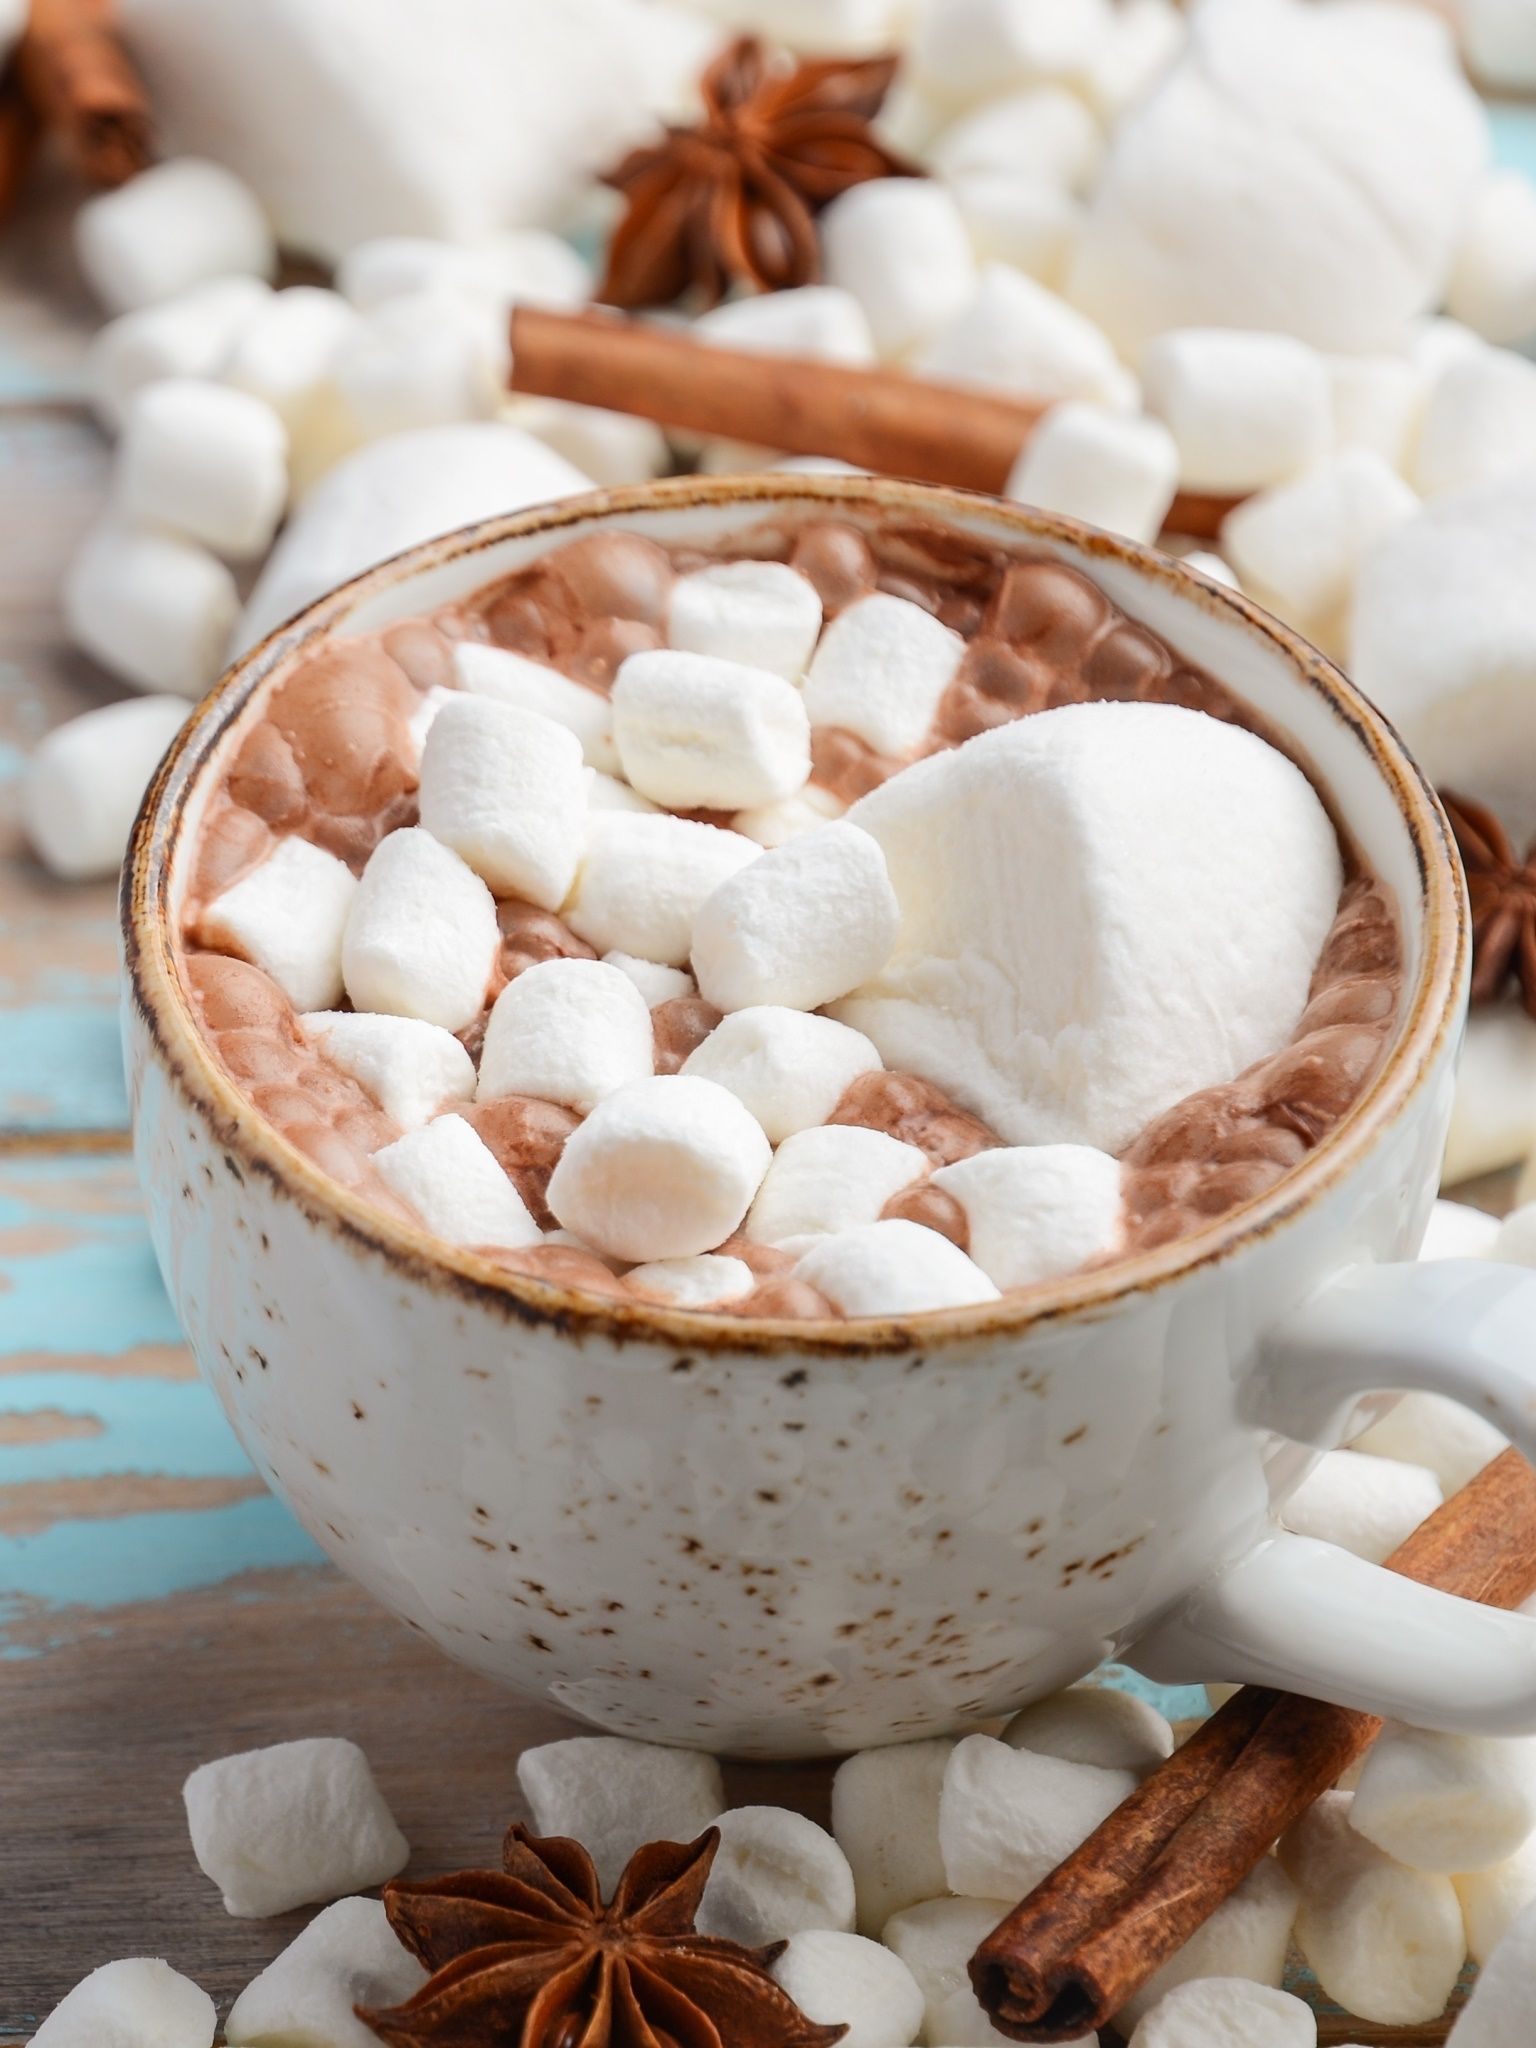 Wallpaper / Food Hot Chocolate Phone Wallpaper, Marshmallow, Cup, 1536x2048 free download